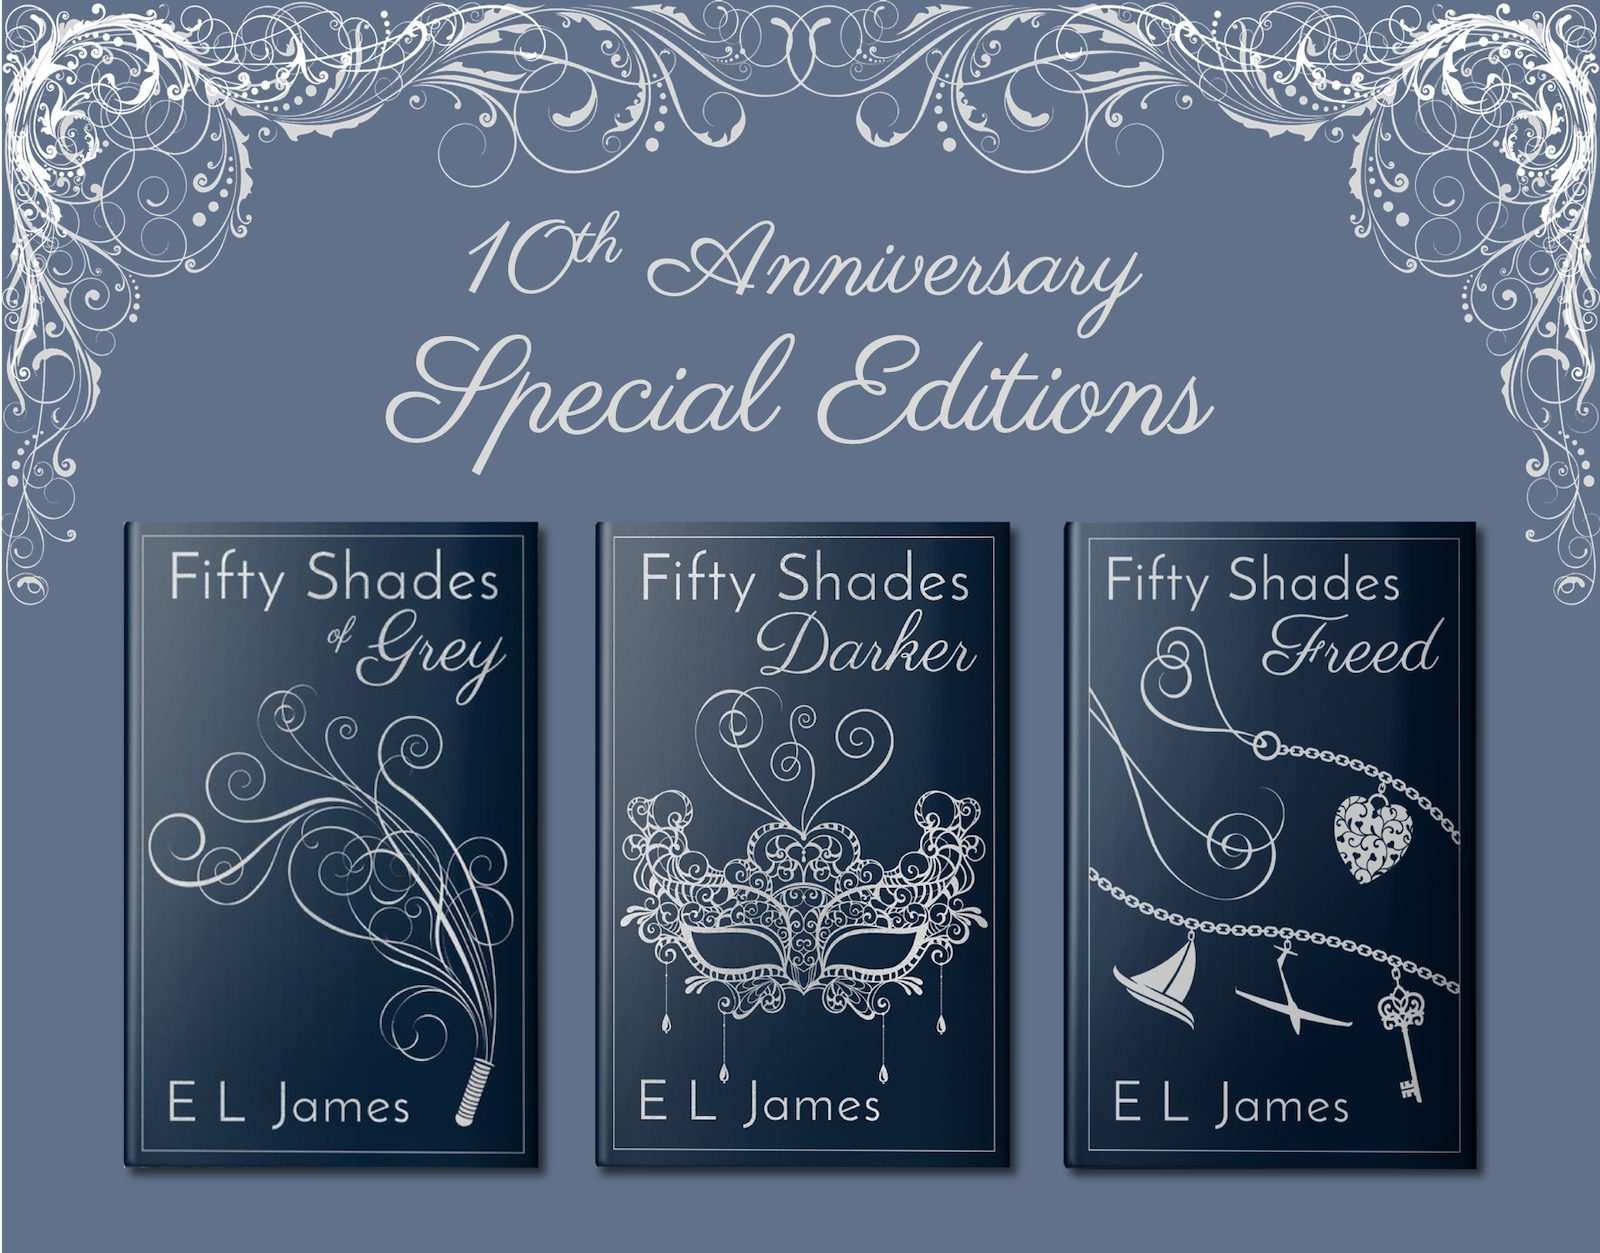 Fifty Shades Trilogy - 10th Anniversary Special Editions